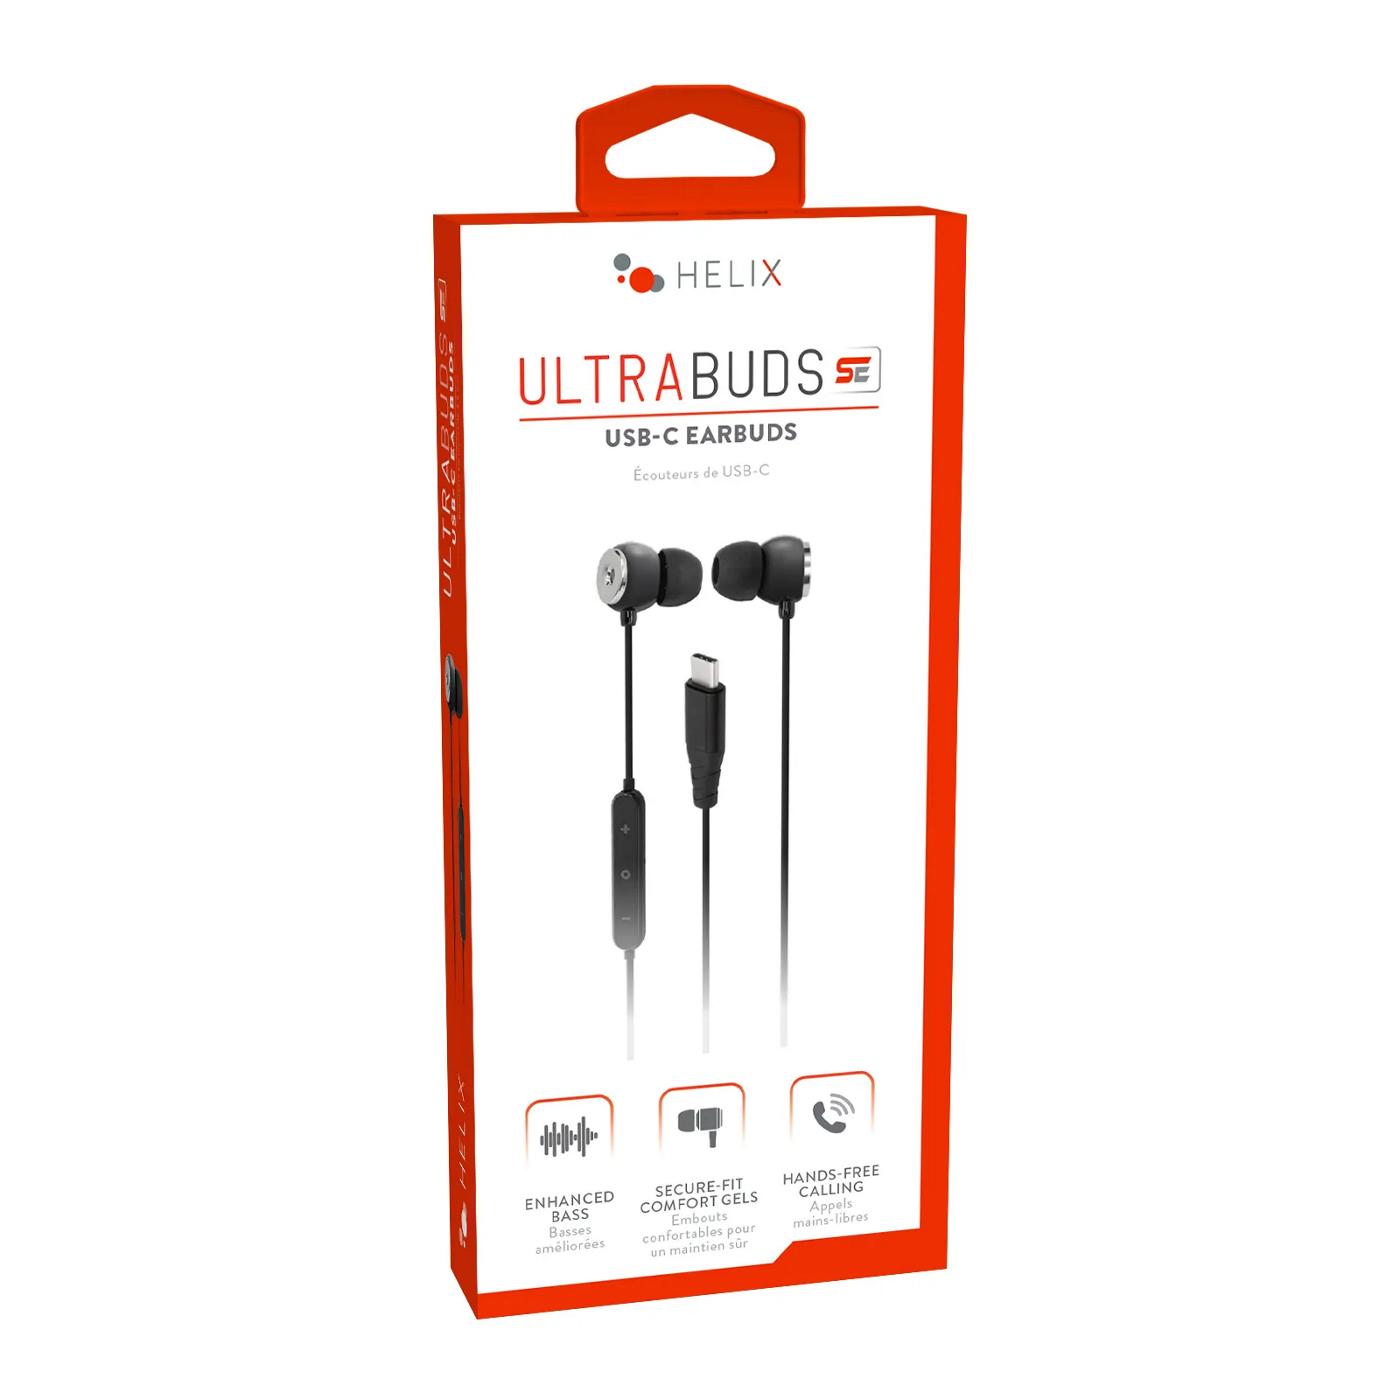 Helix Ultra USB-C Earbuds - Black; image 1 of 2